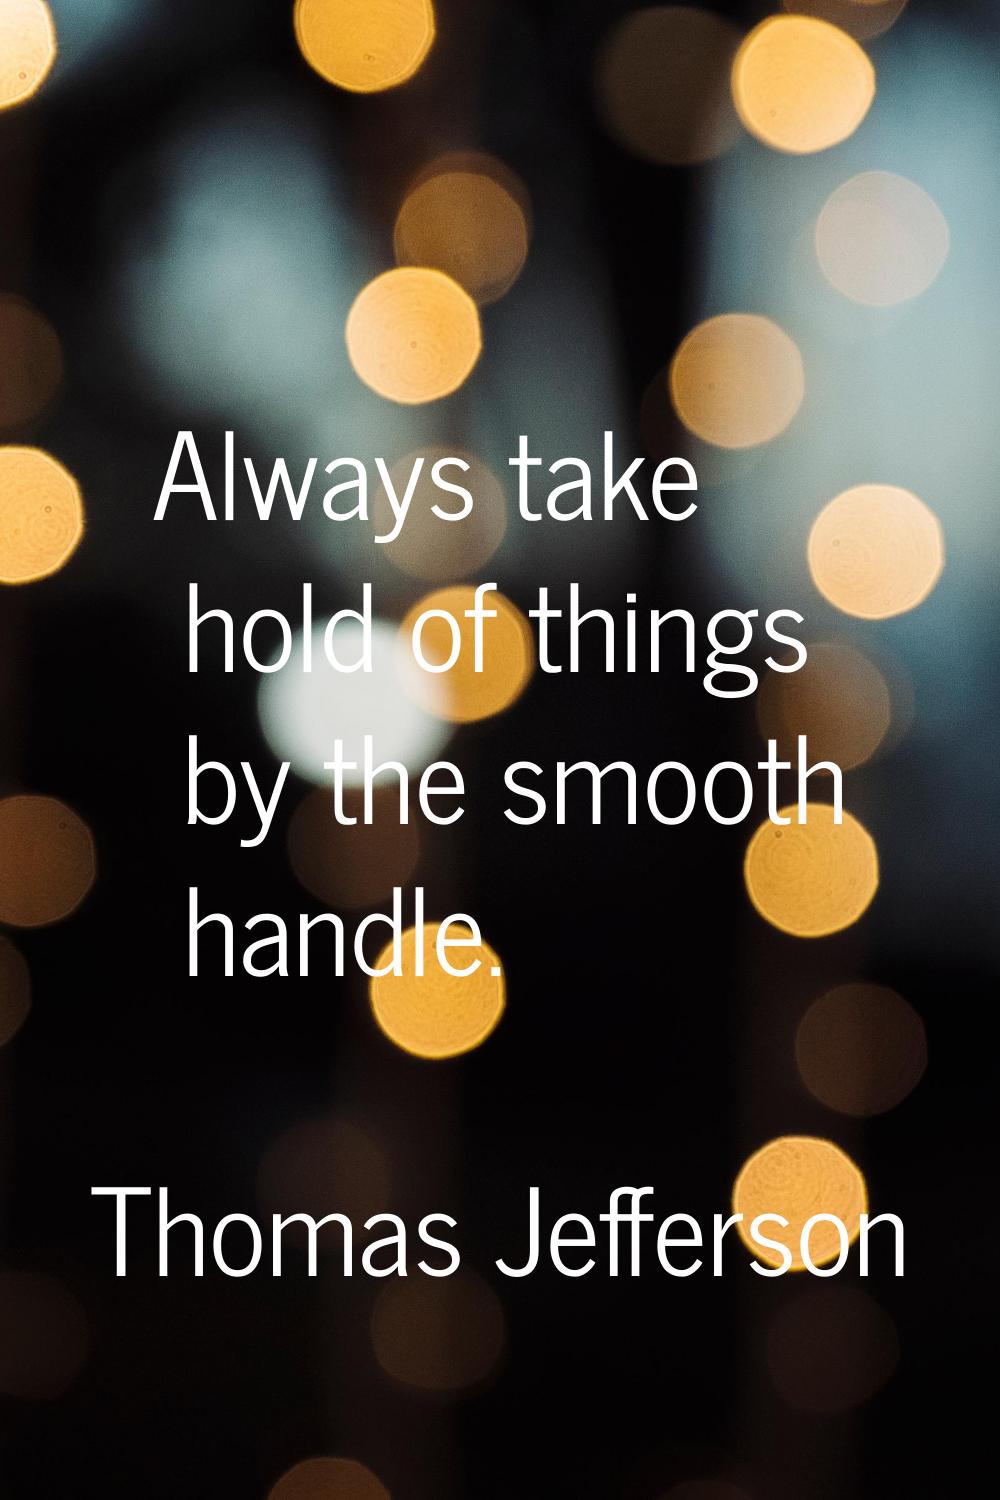 Always take hold of things by the smooth handle.